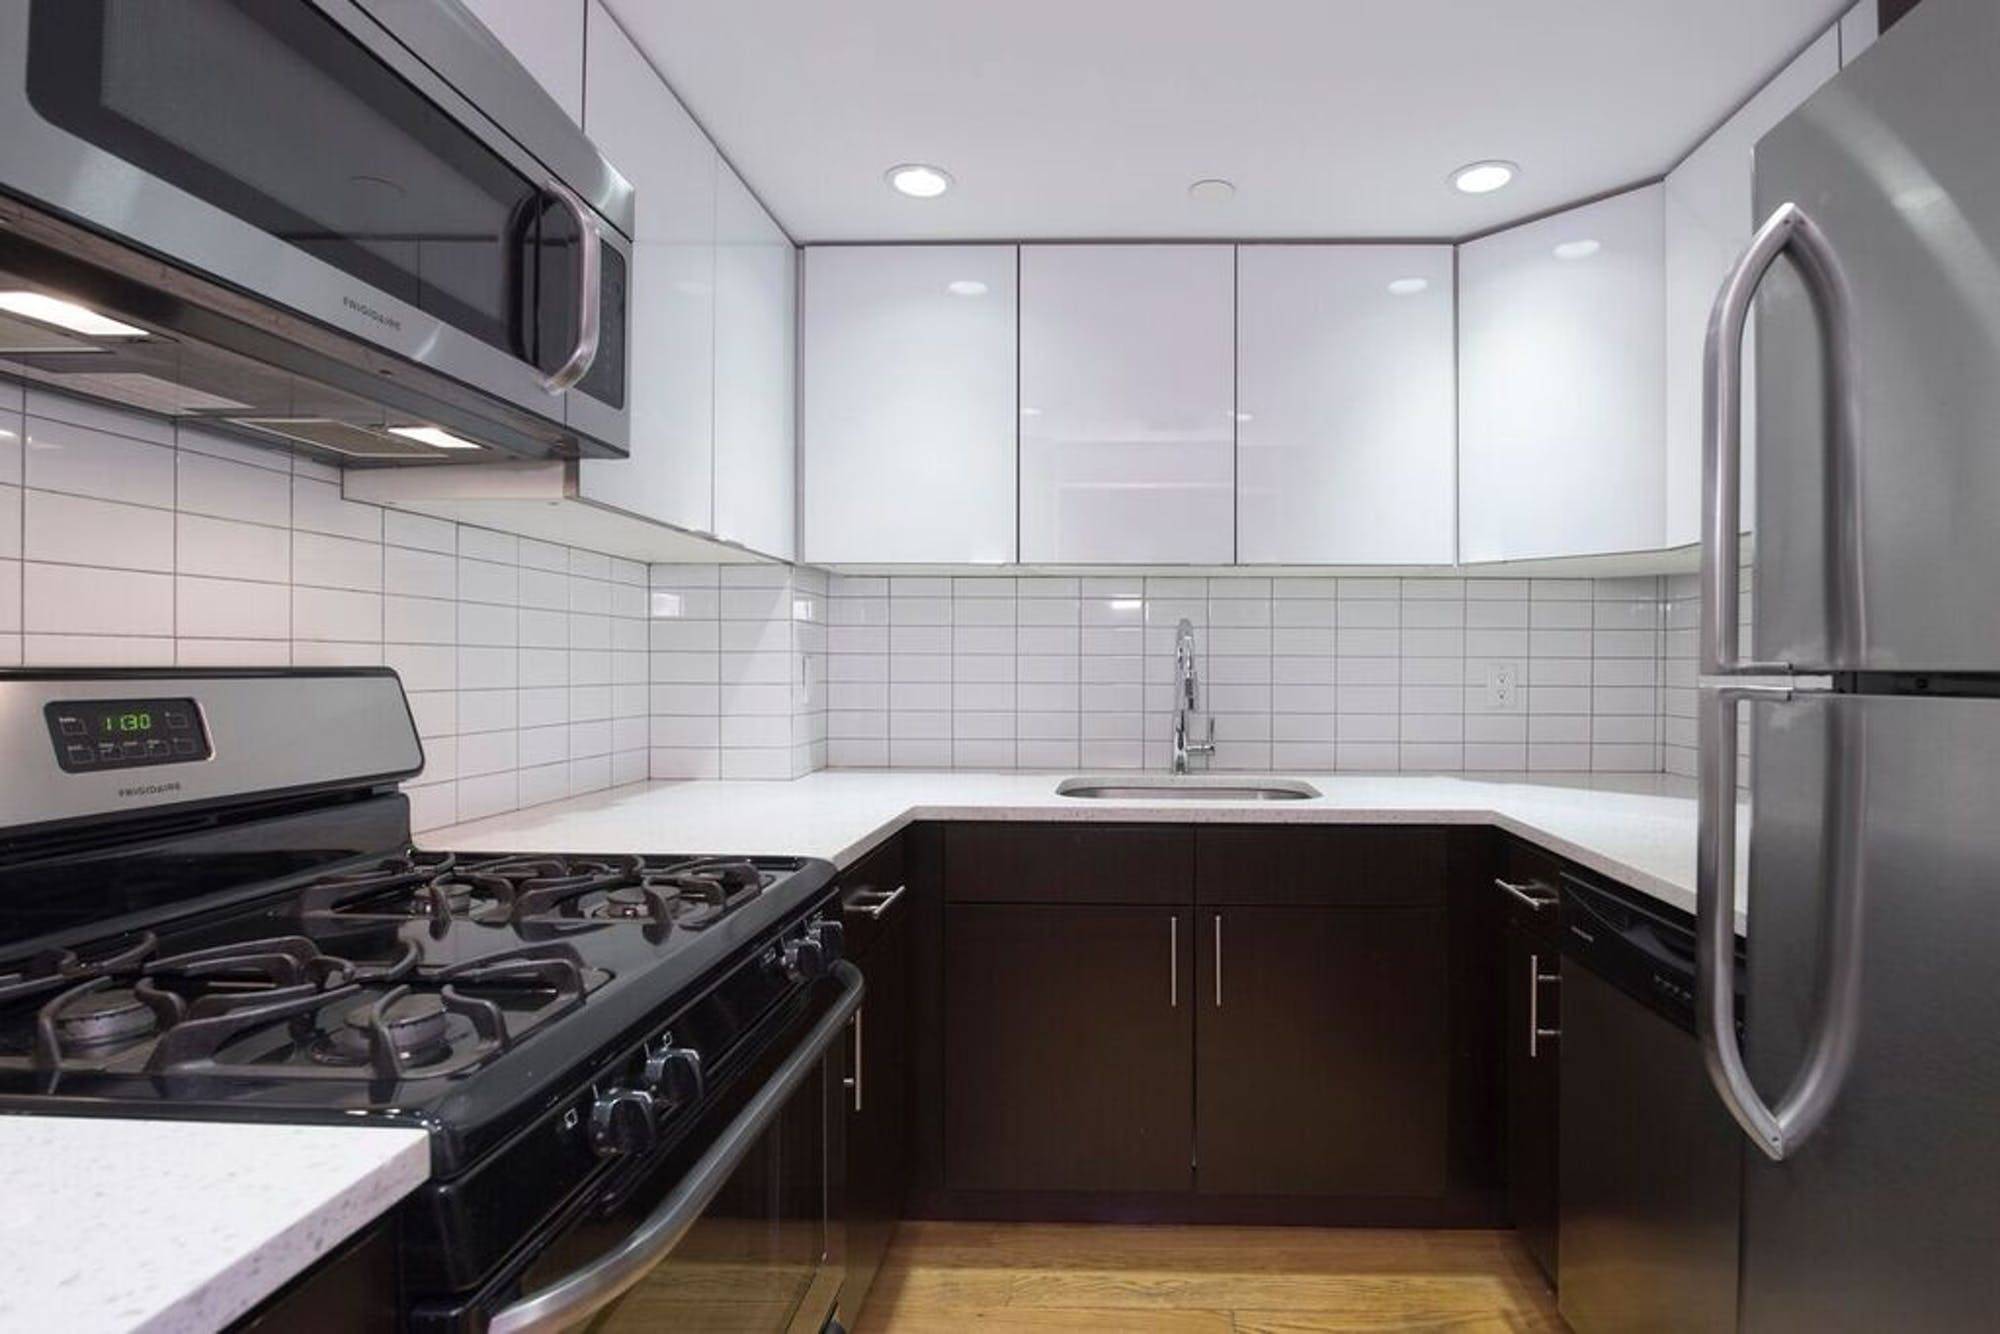 No Fee amp ; One Month Free Excellent deal on a spacious three bedroom in Crown Heights.